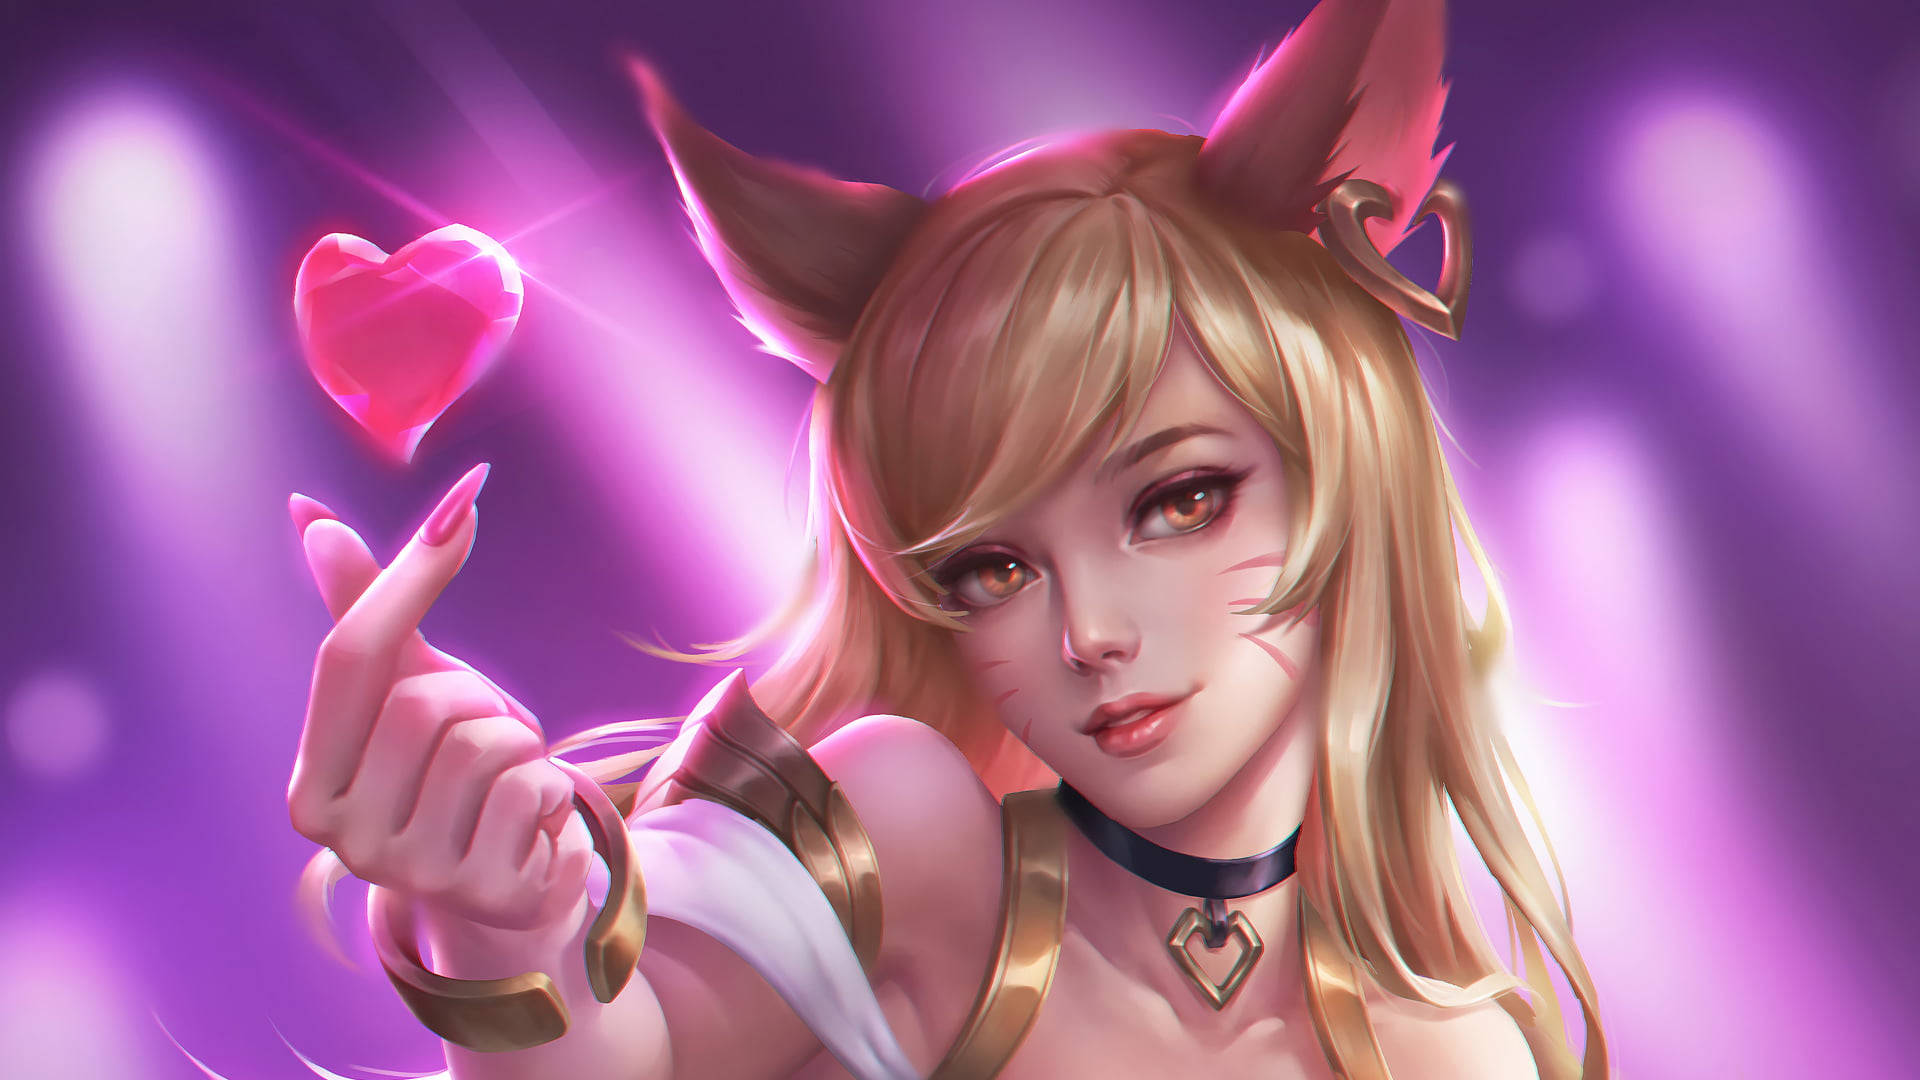 Experiencing Love Through A Hand Heart In League Of Legends Wallpaper